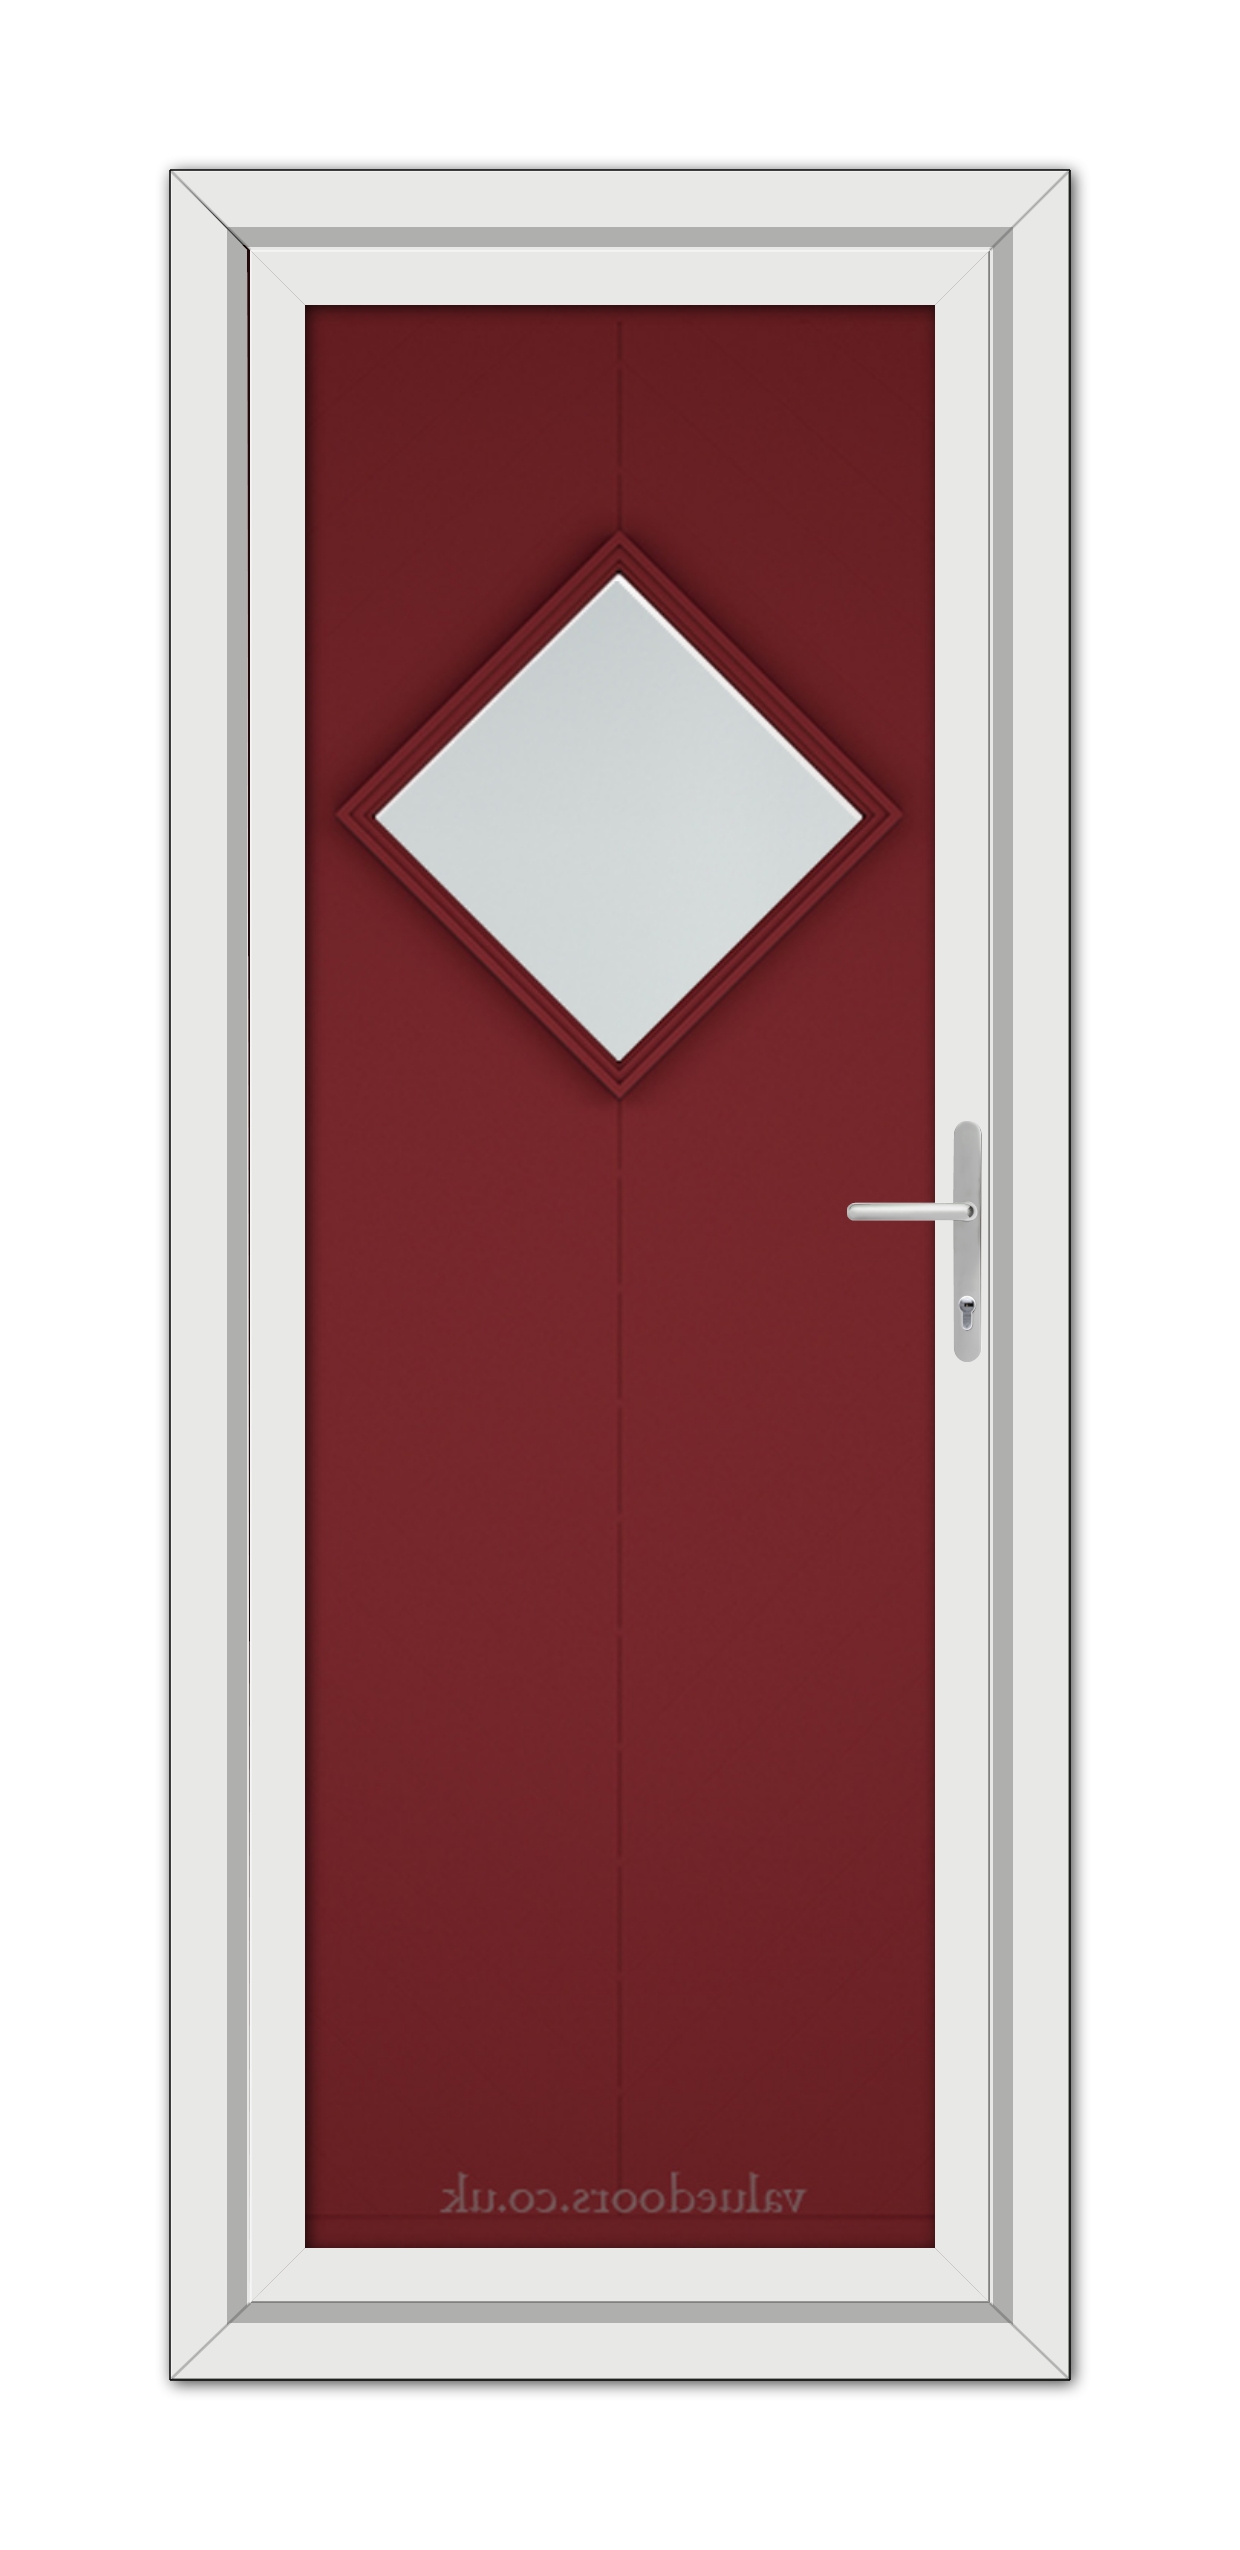 A modern Red Hamburg uPVC Door featuring a white diamond-shaped window, framed in white, with a silver handle on the right side.